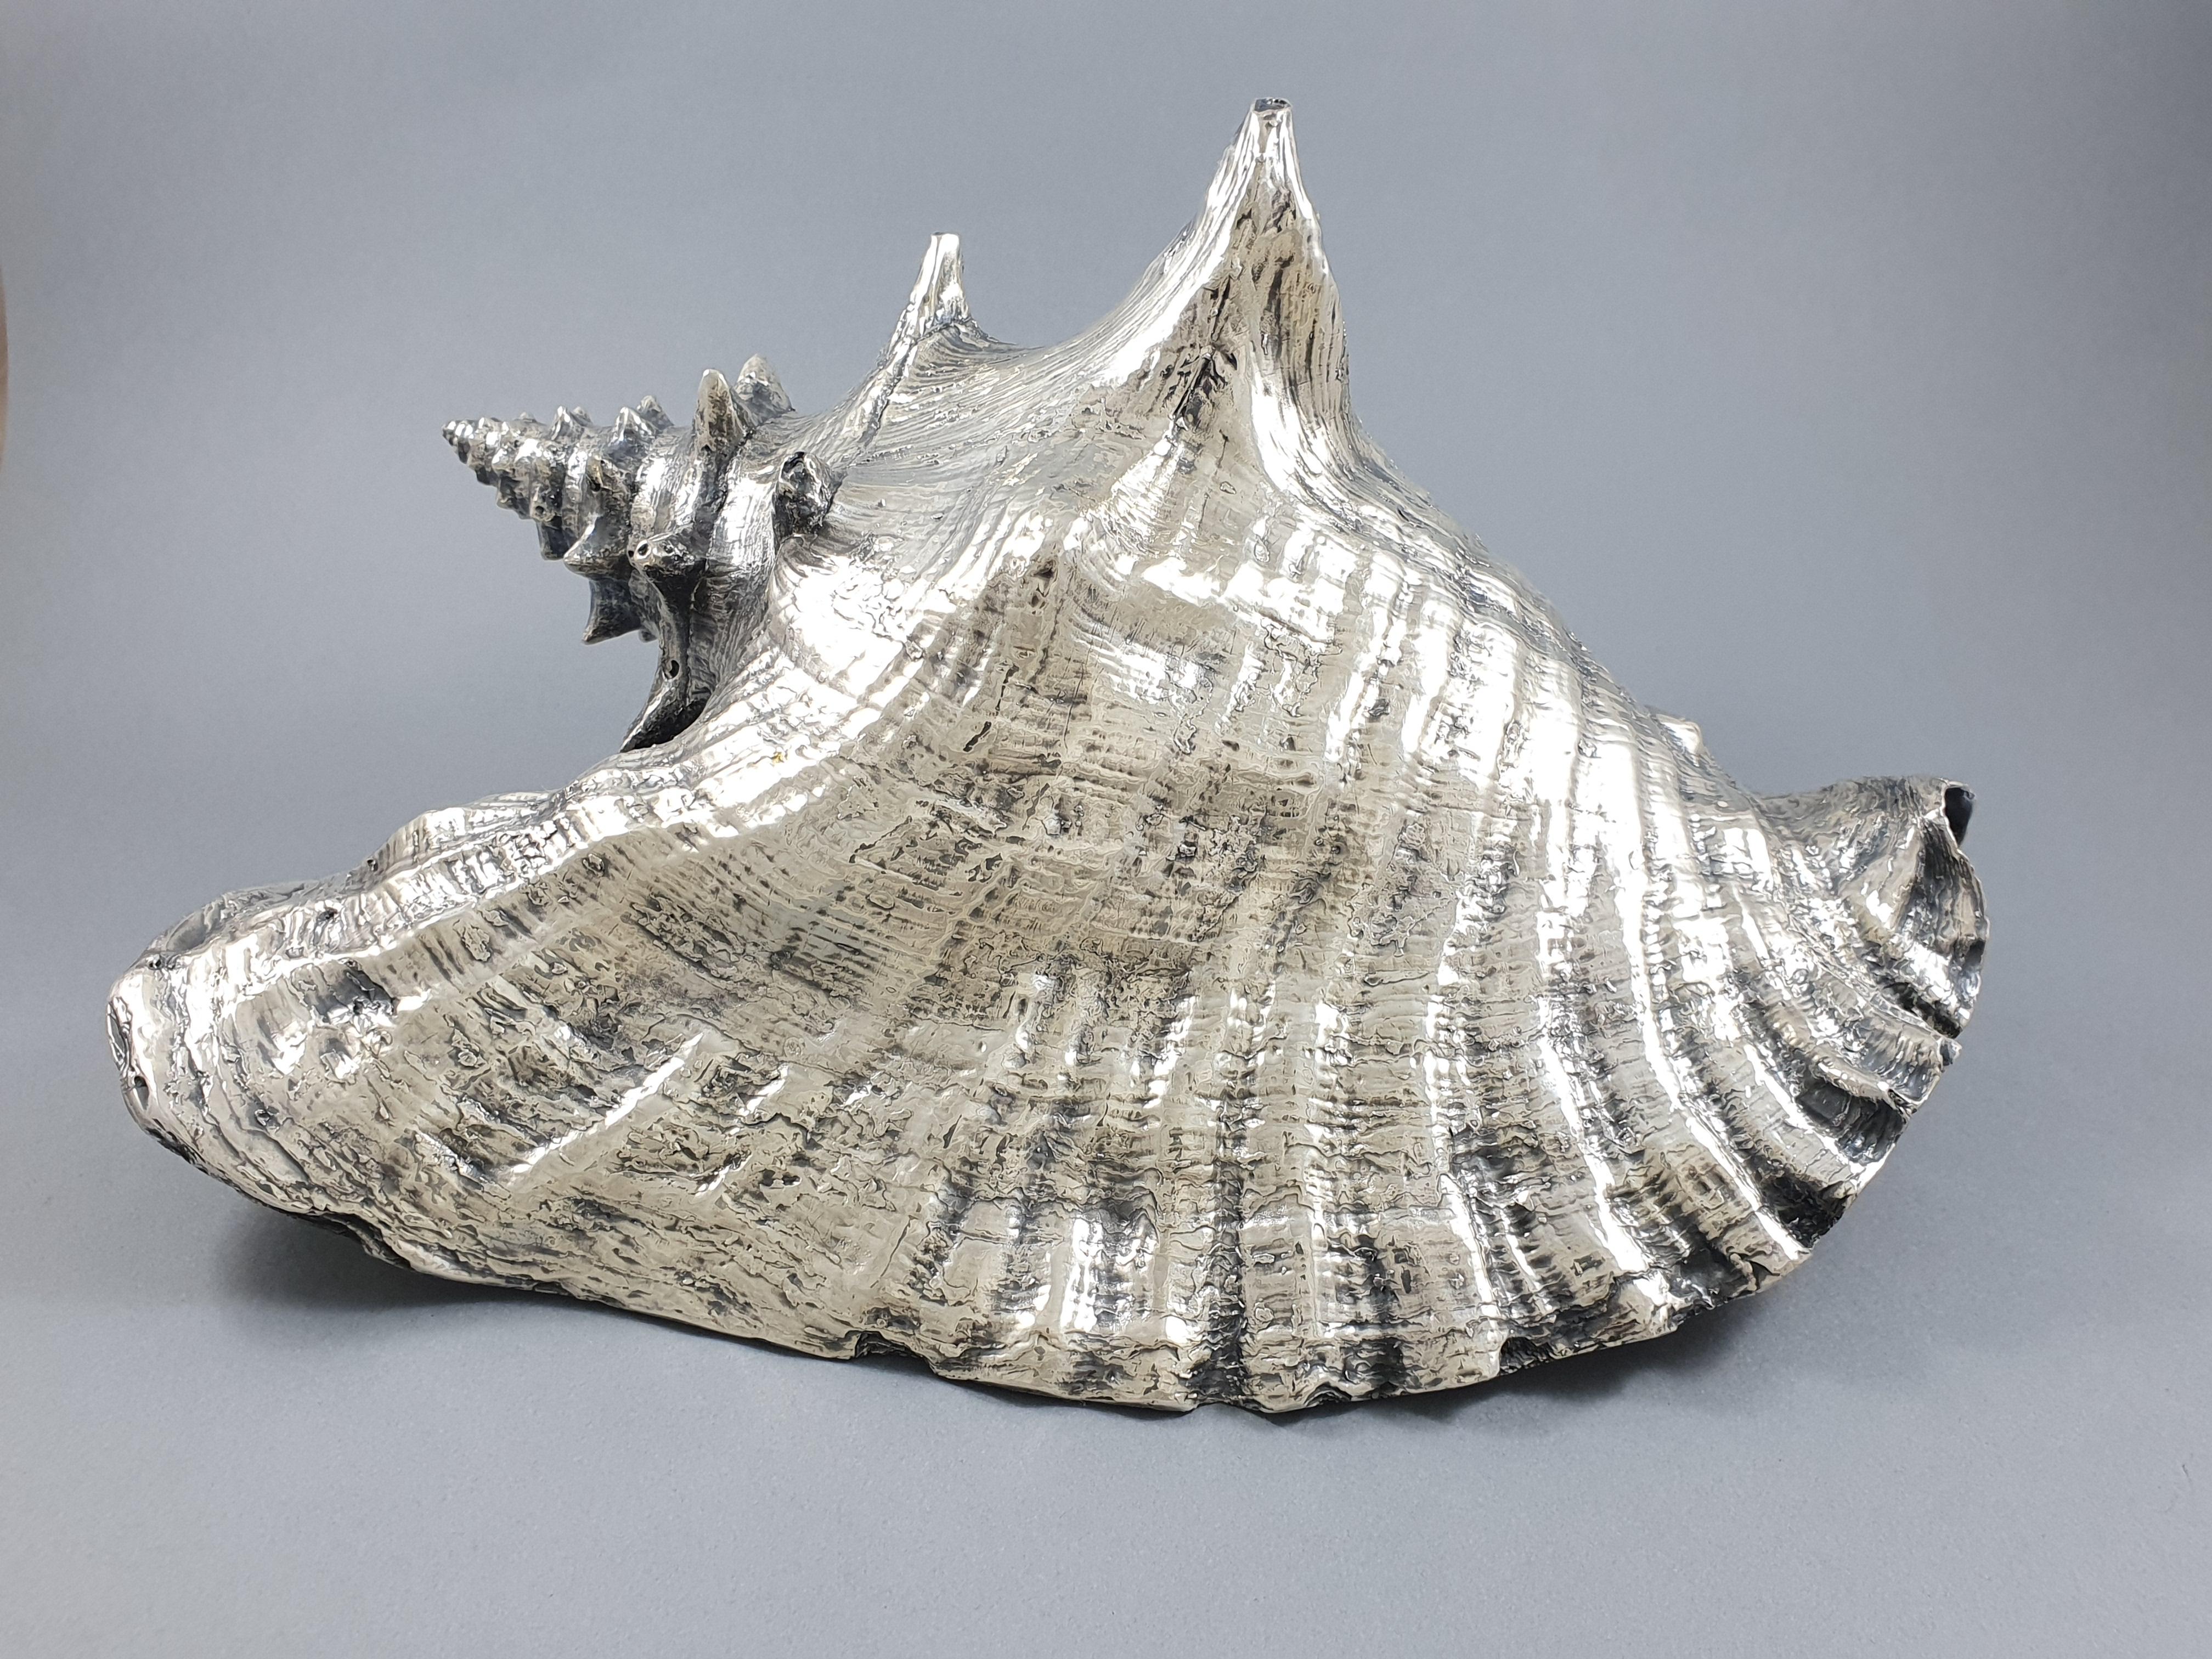 Large shell mounted in sterling silver 

Hallmark of Frederico Buccellati and 999 silver 

Measures: Length: 26.5 cm 
Width: 20 cm 
Height: 14 cm

Great condition.